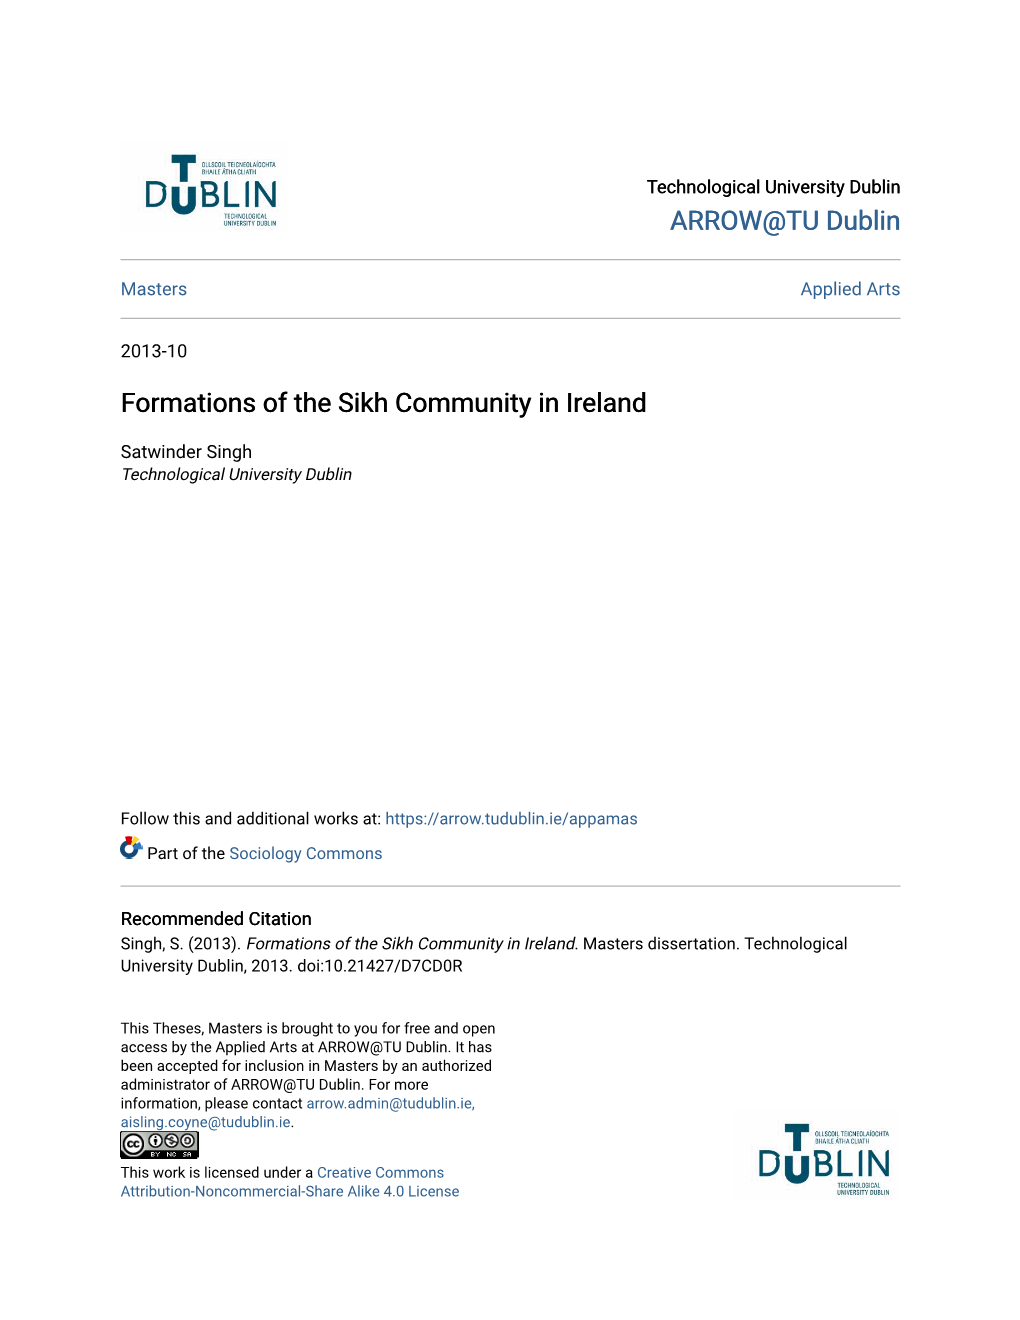 Formations of the Sikh Community in Ireland